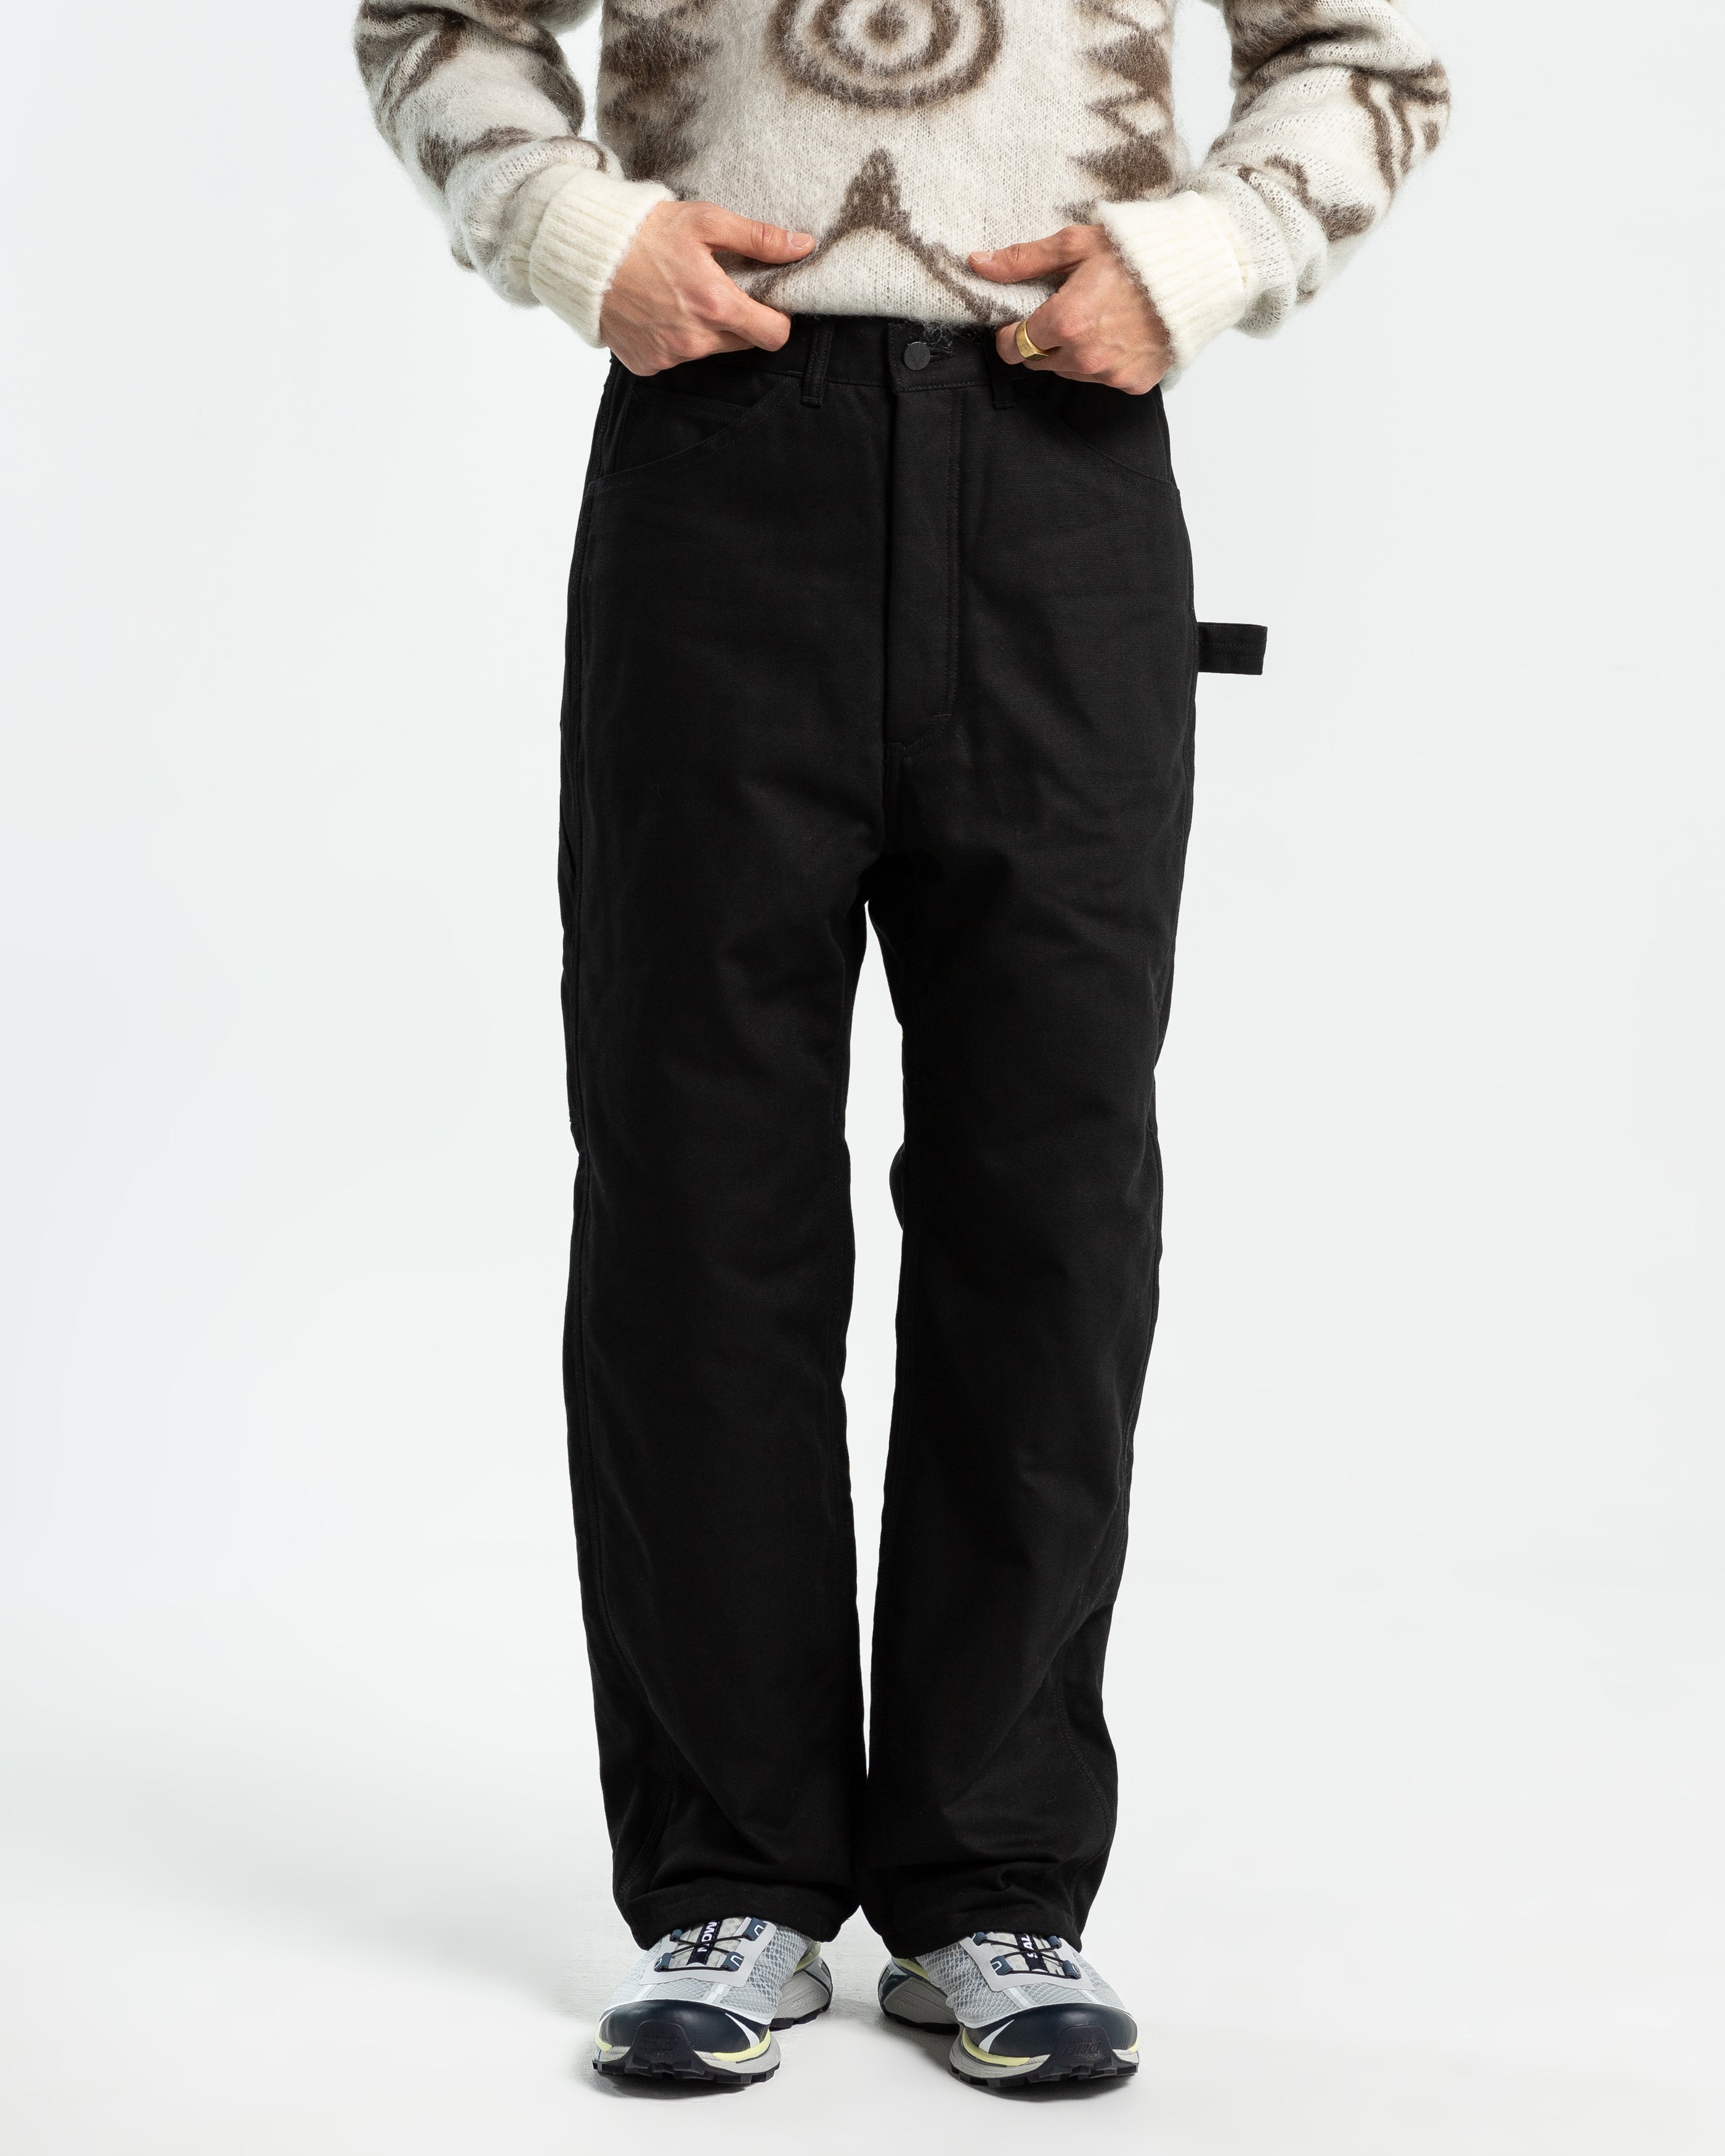 Lined Painter Pant in Black